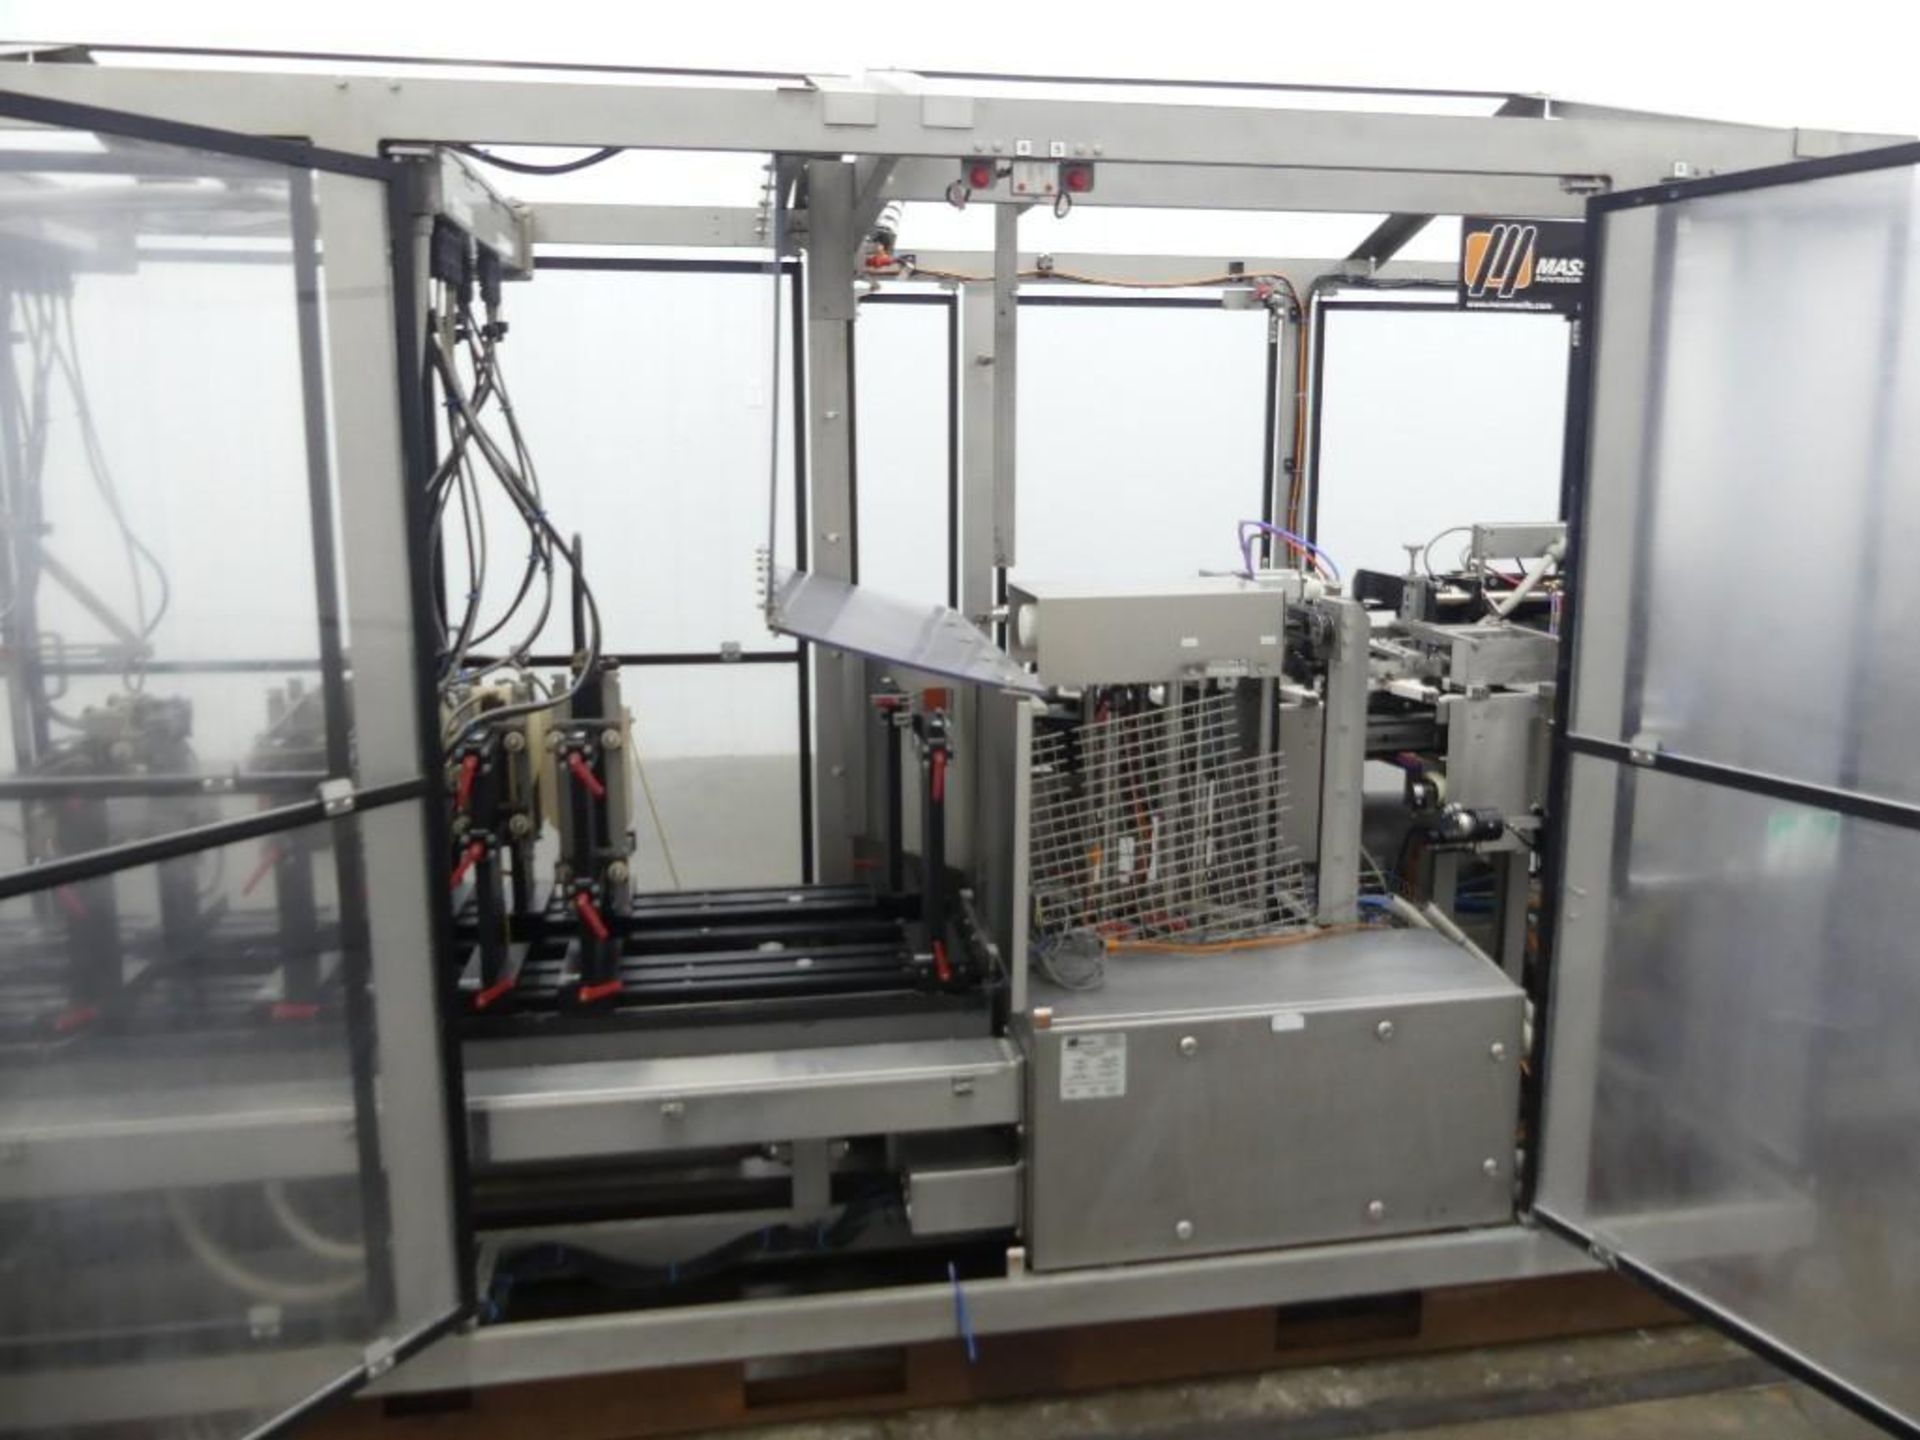 Massman HFFS-IM1000 Flexible Pouch Packaging System - Image 20 of 127